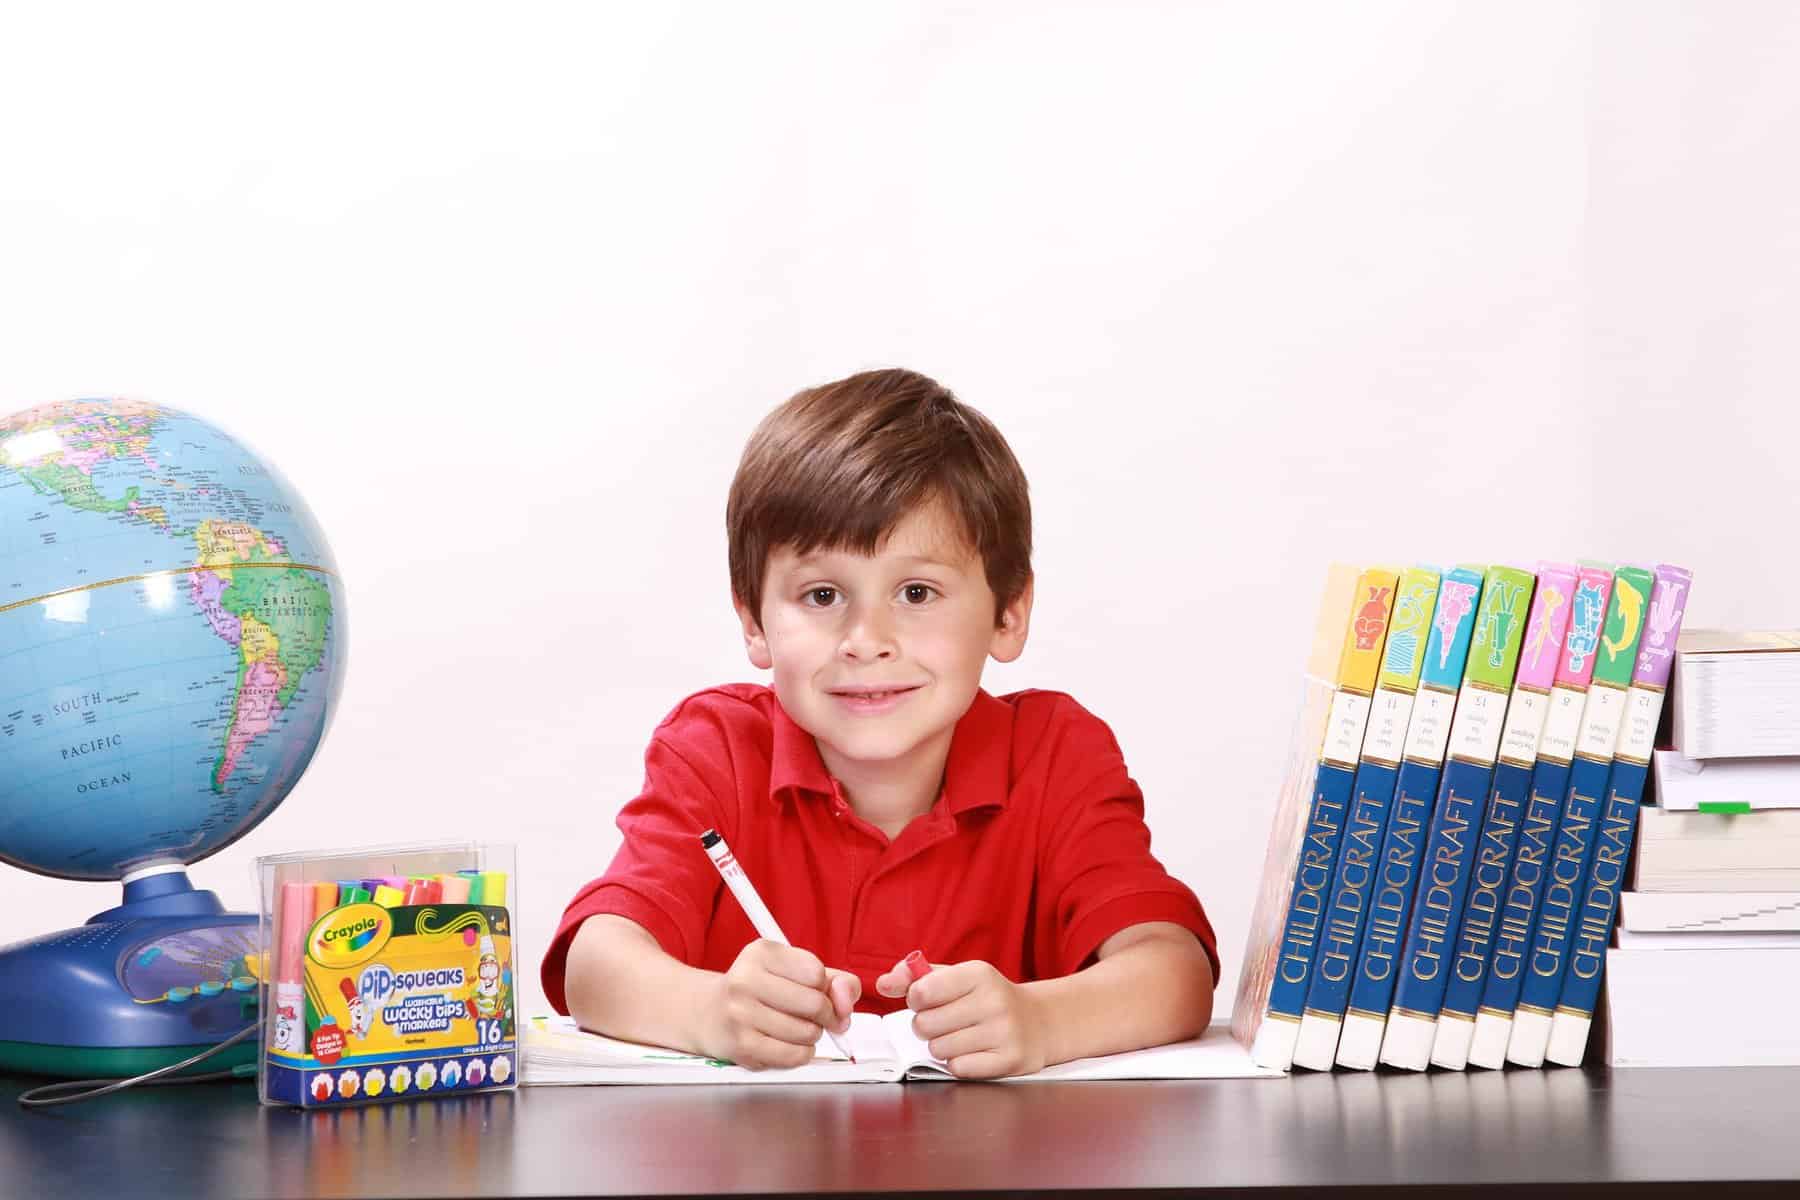 A child sits at a desk holding a pen over paper and surrounded by a globe, books, and school supplies.